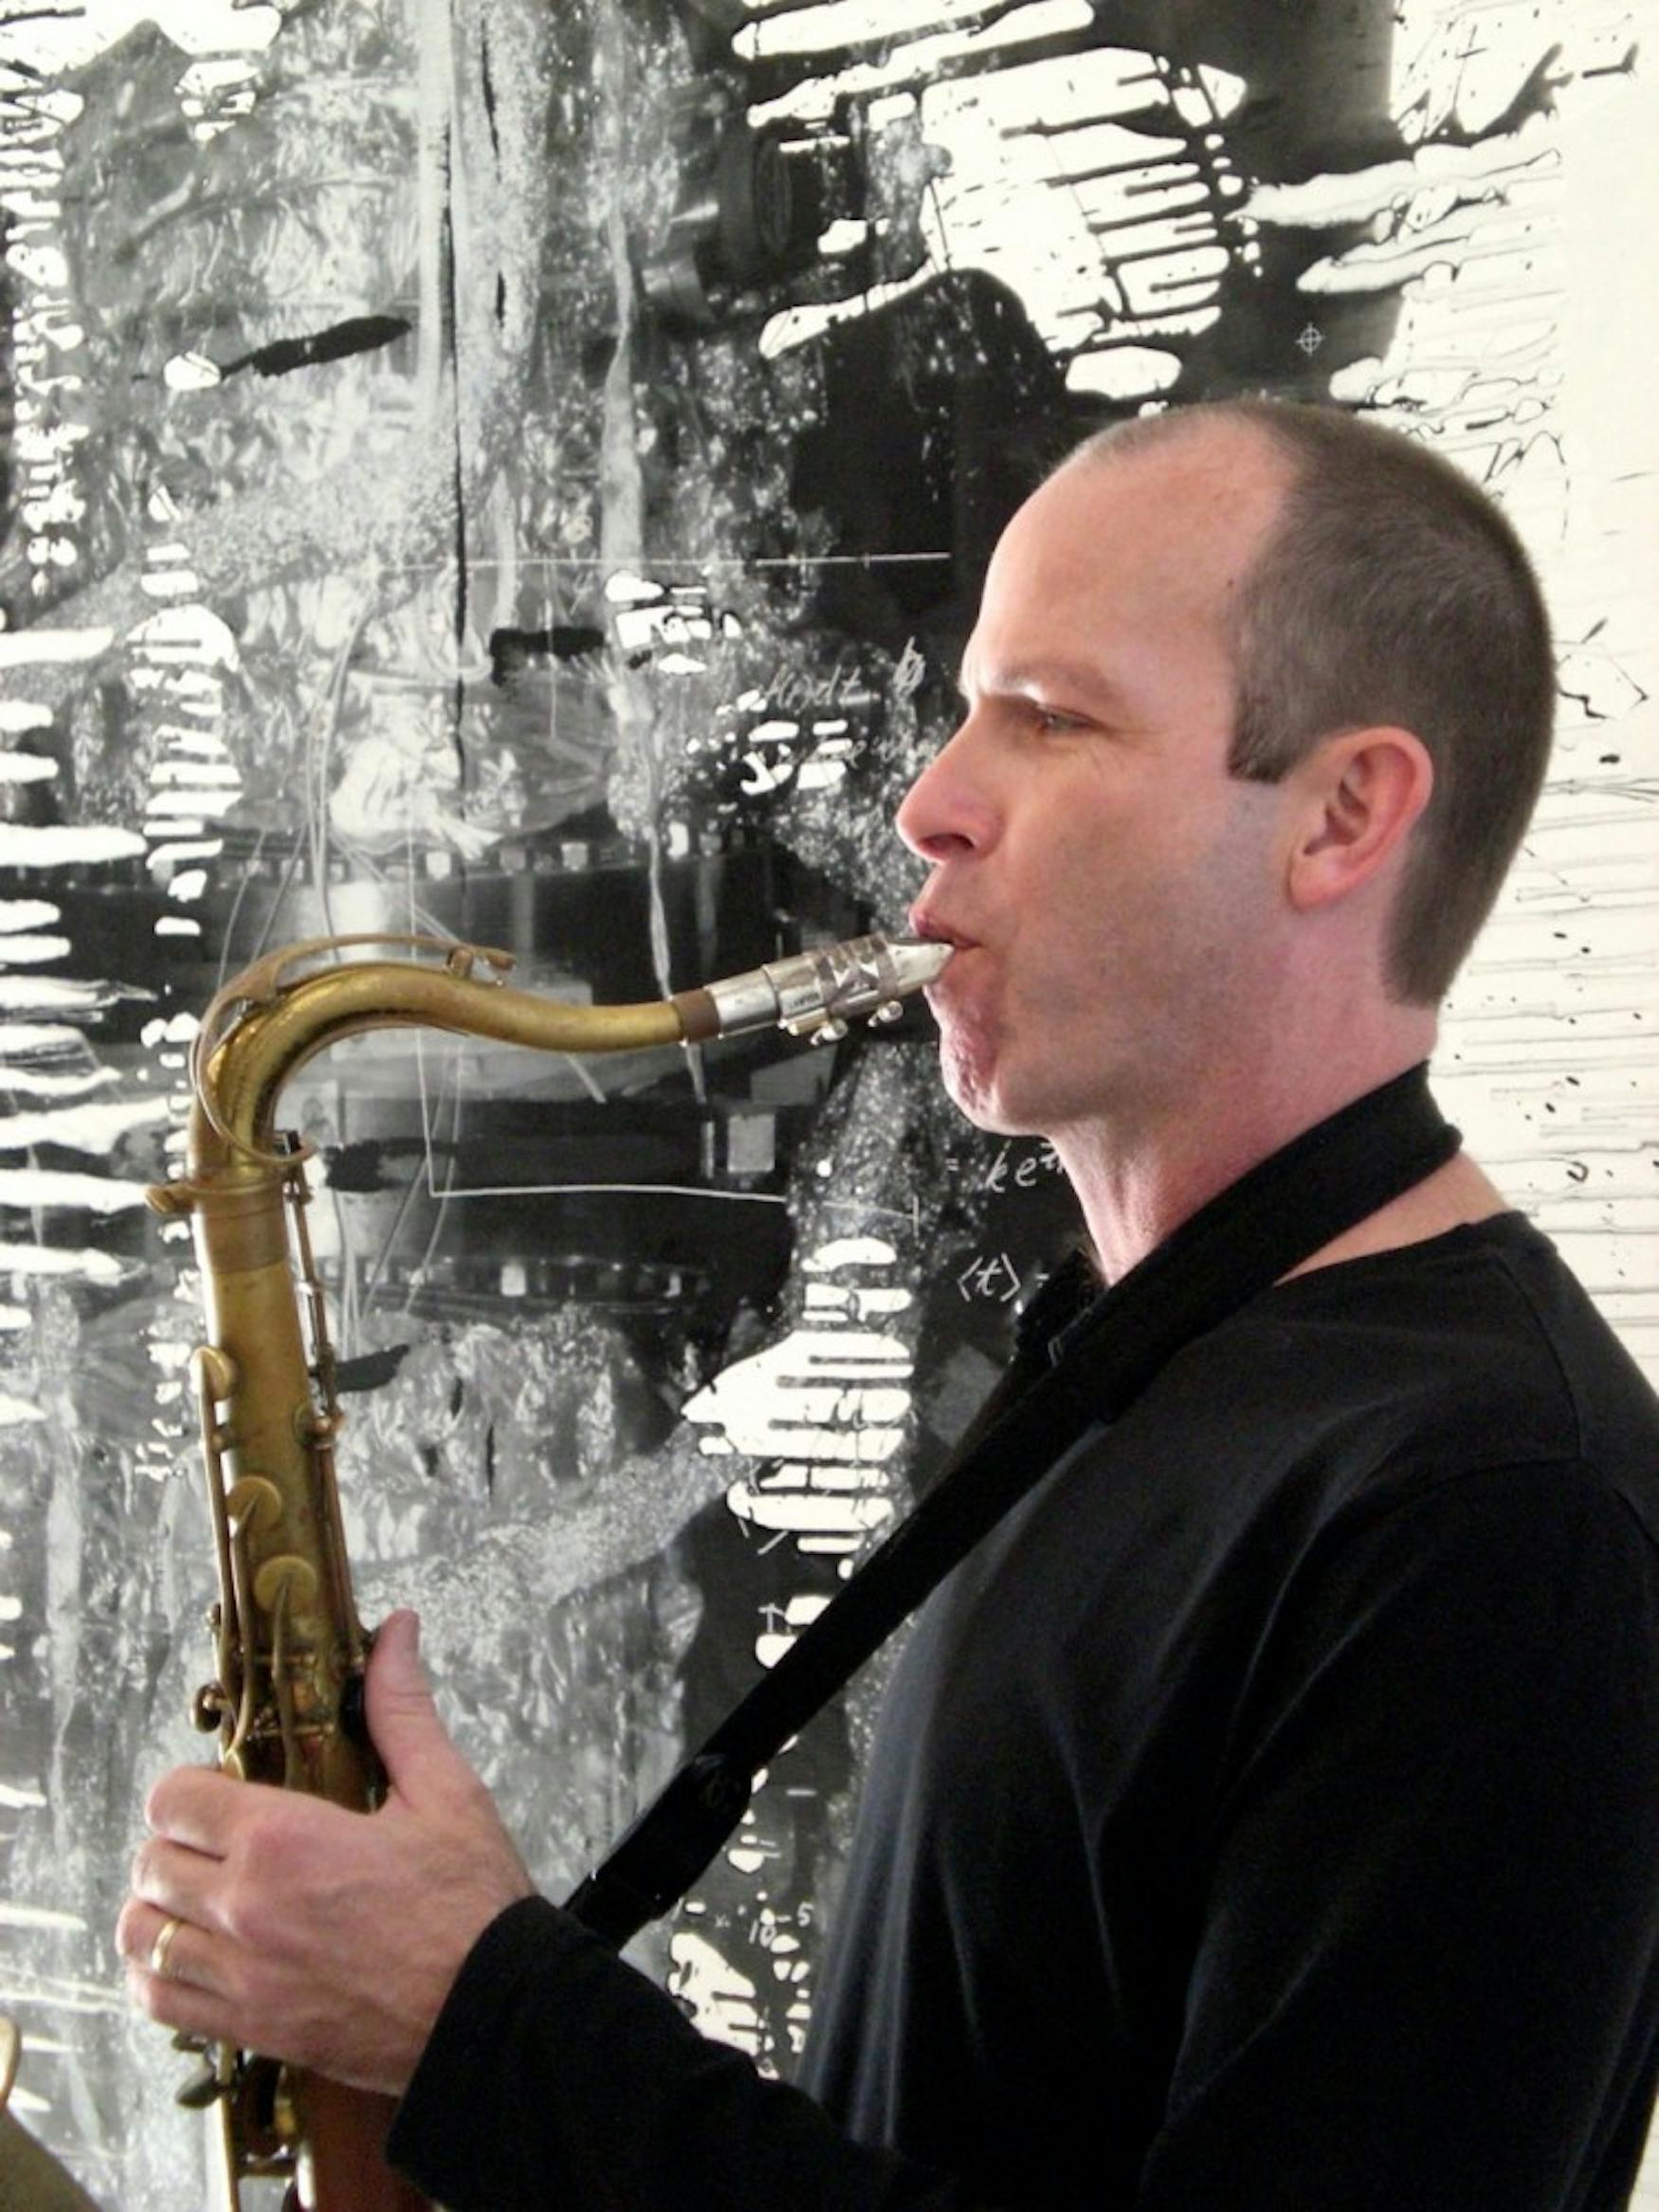 SAXOPHONE SOUNDS: Prof. Tom Hall (MUS), the artistic director of the Improv Festival, has a deep background in improvisation. He has instructed the Brandeis Improv Collective and created a video series about improvisation in 2012 called ImprovLive 365.